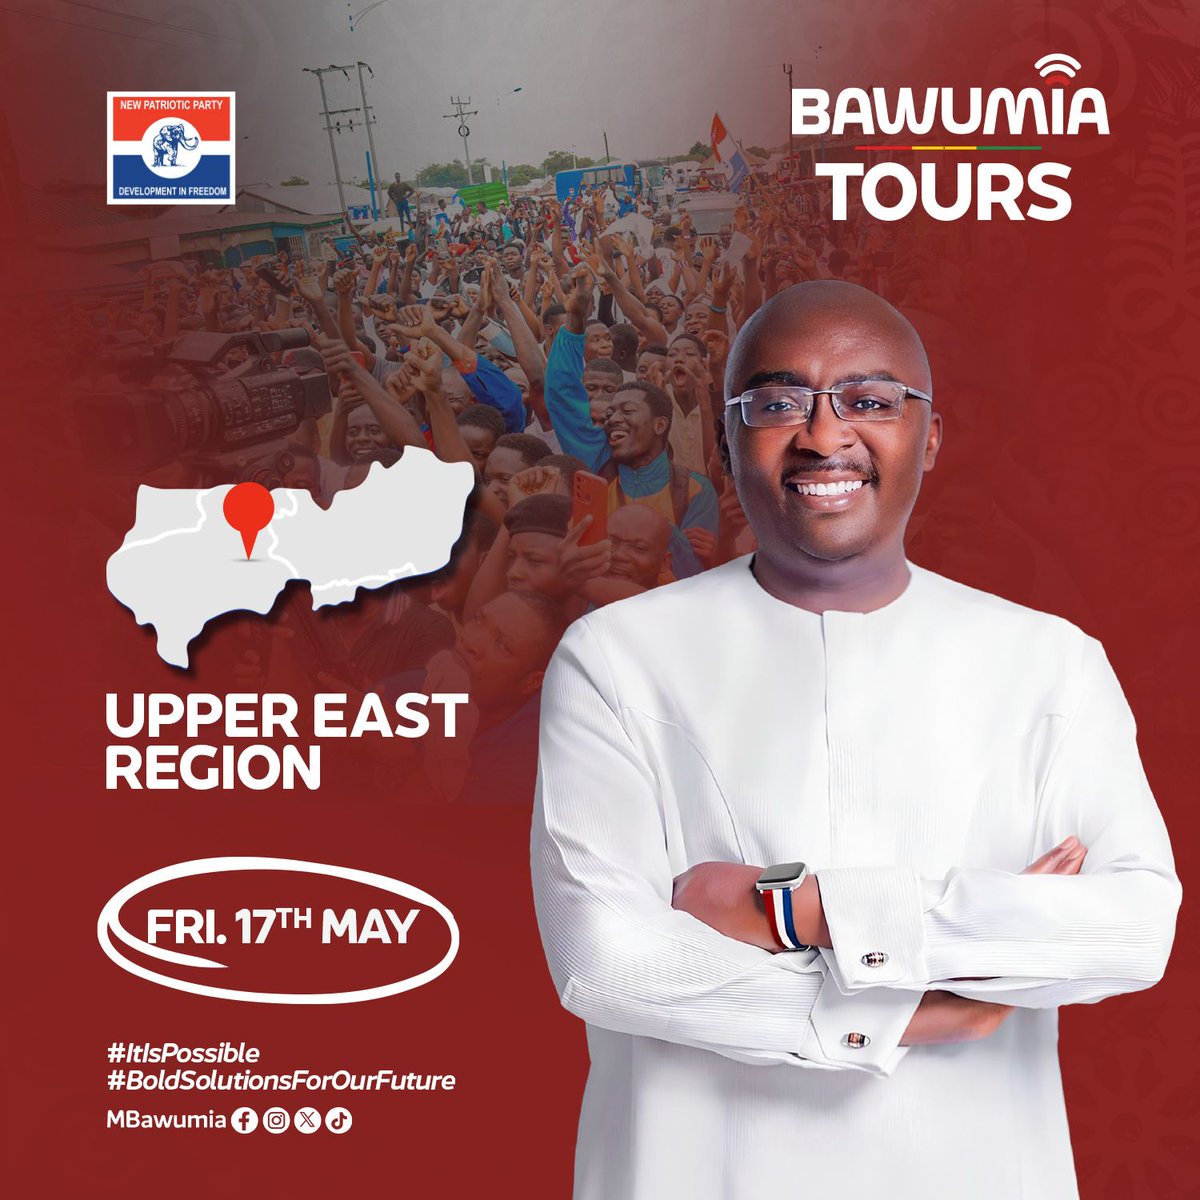 Upper East Region, here we are🔥🔥🔥
#Bawumia2024 
#ItIsPossible 
#BoldSolutionsForOurFuture
#GhanasNextChapter 
#BawumiaTours